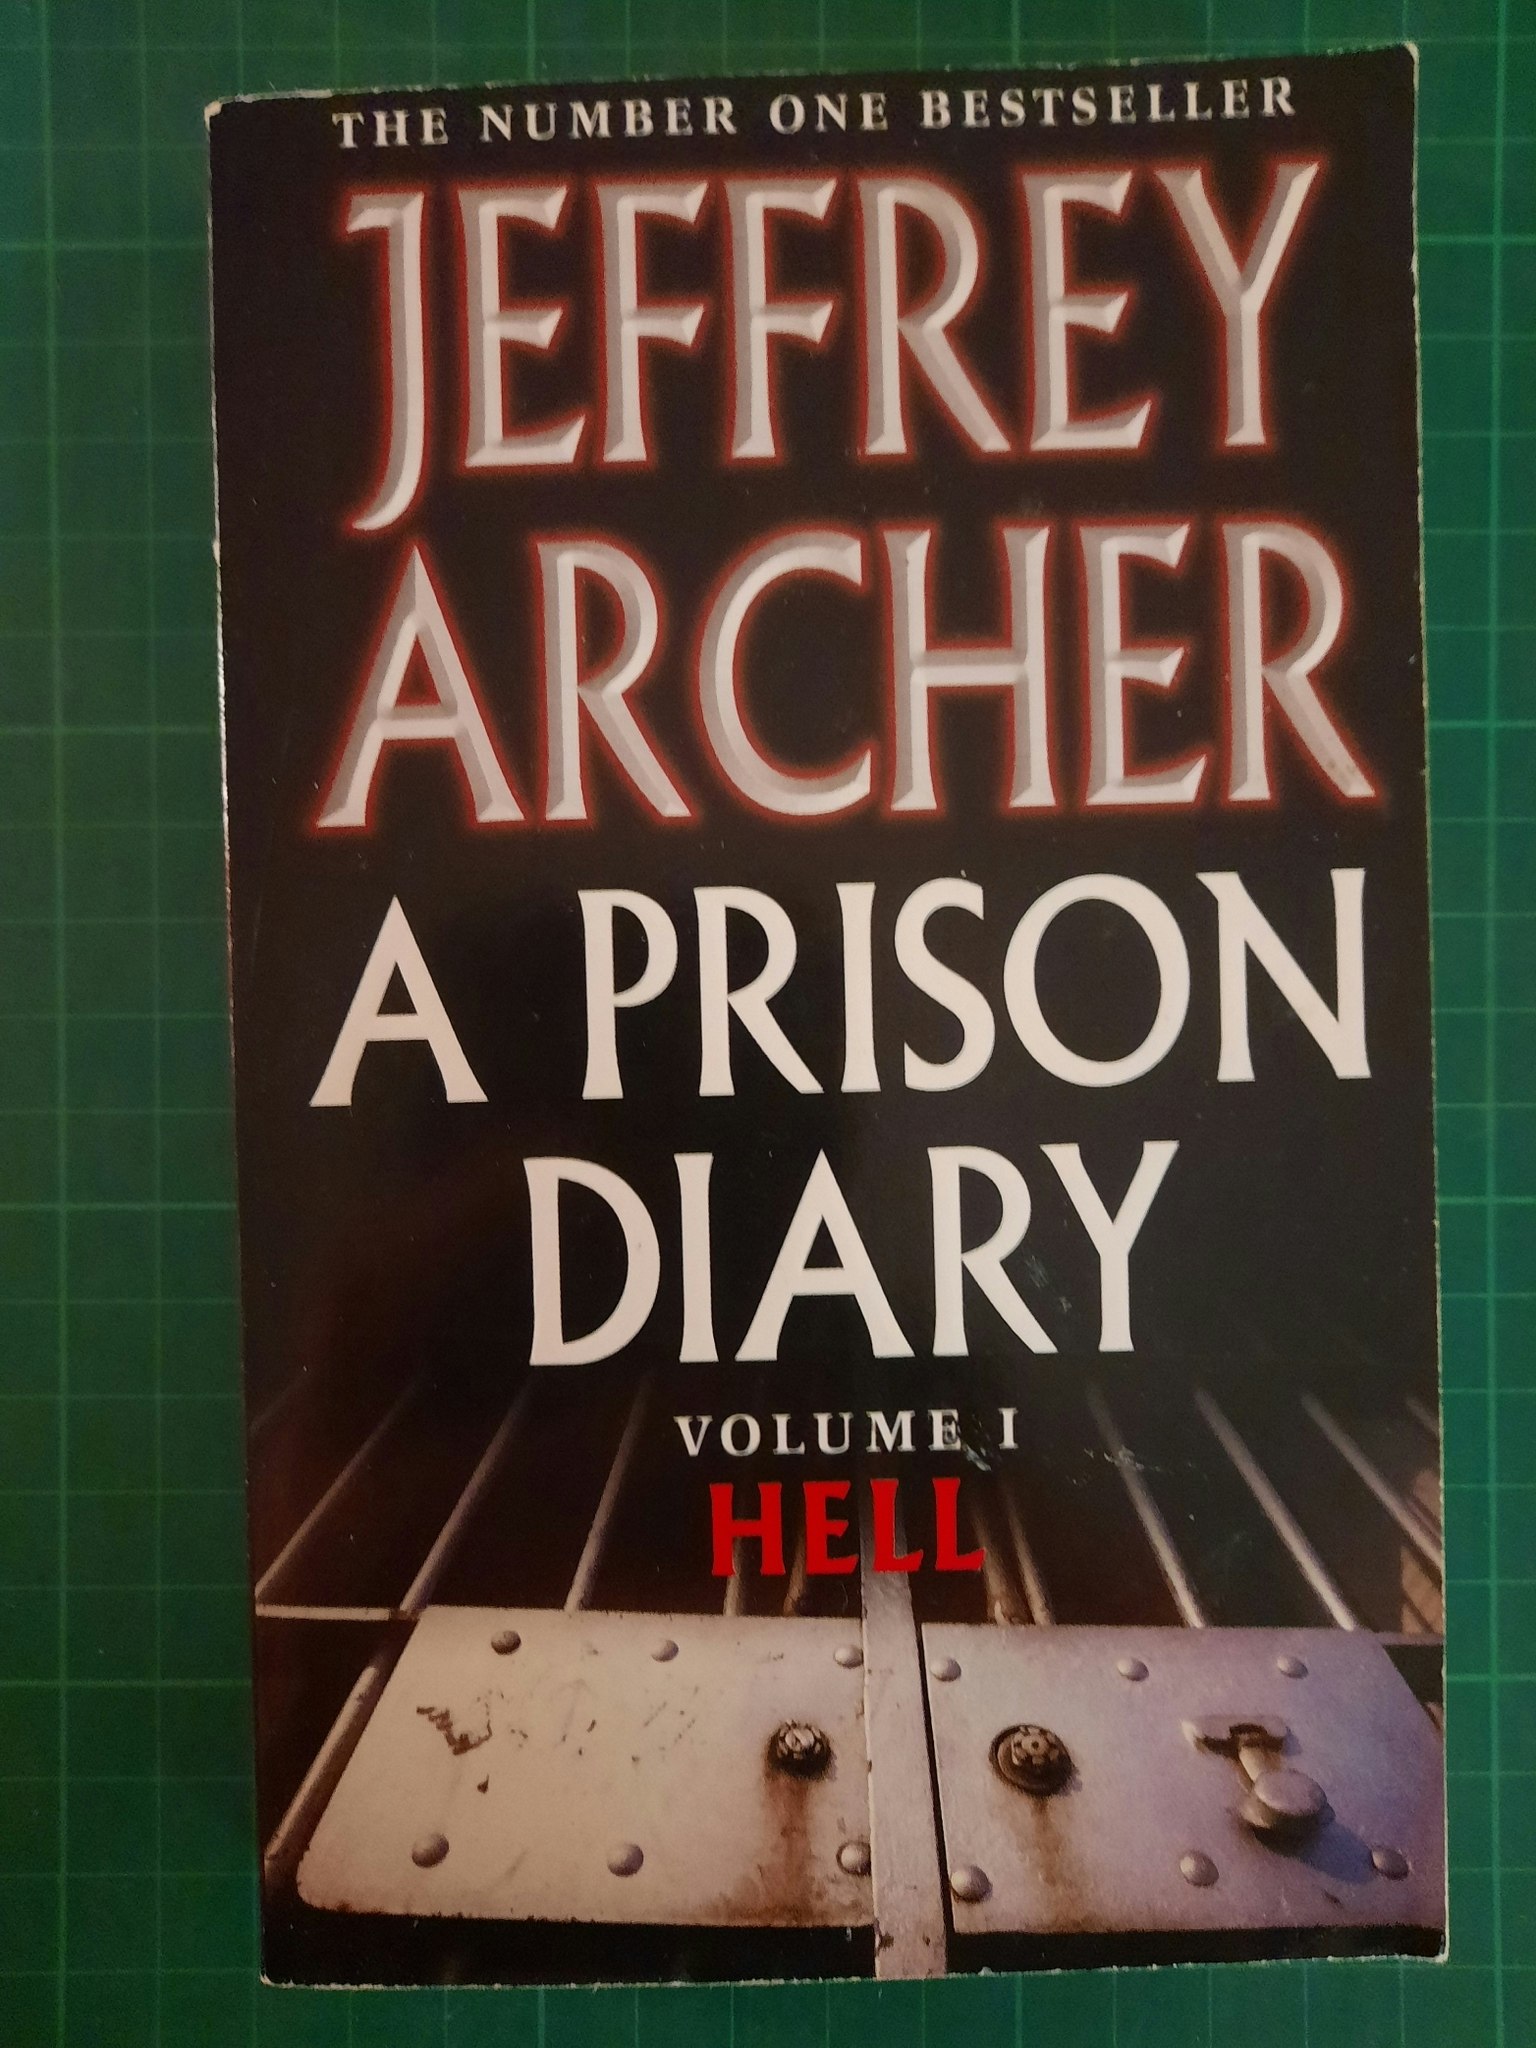 A prison diary Vol 1. Hell